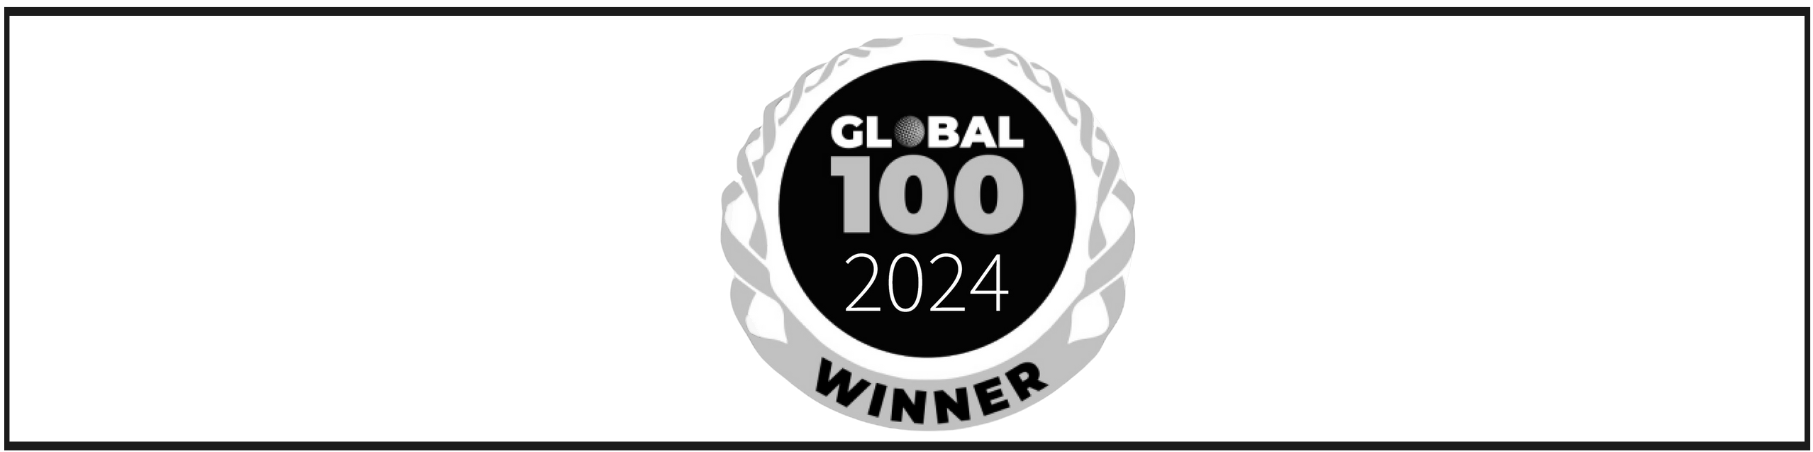 global-100-AWARDS-2024bw.png